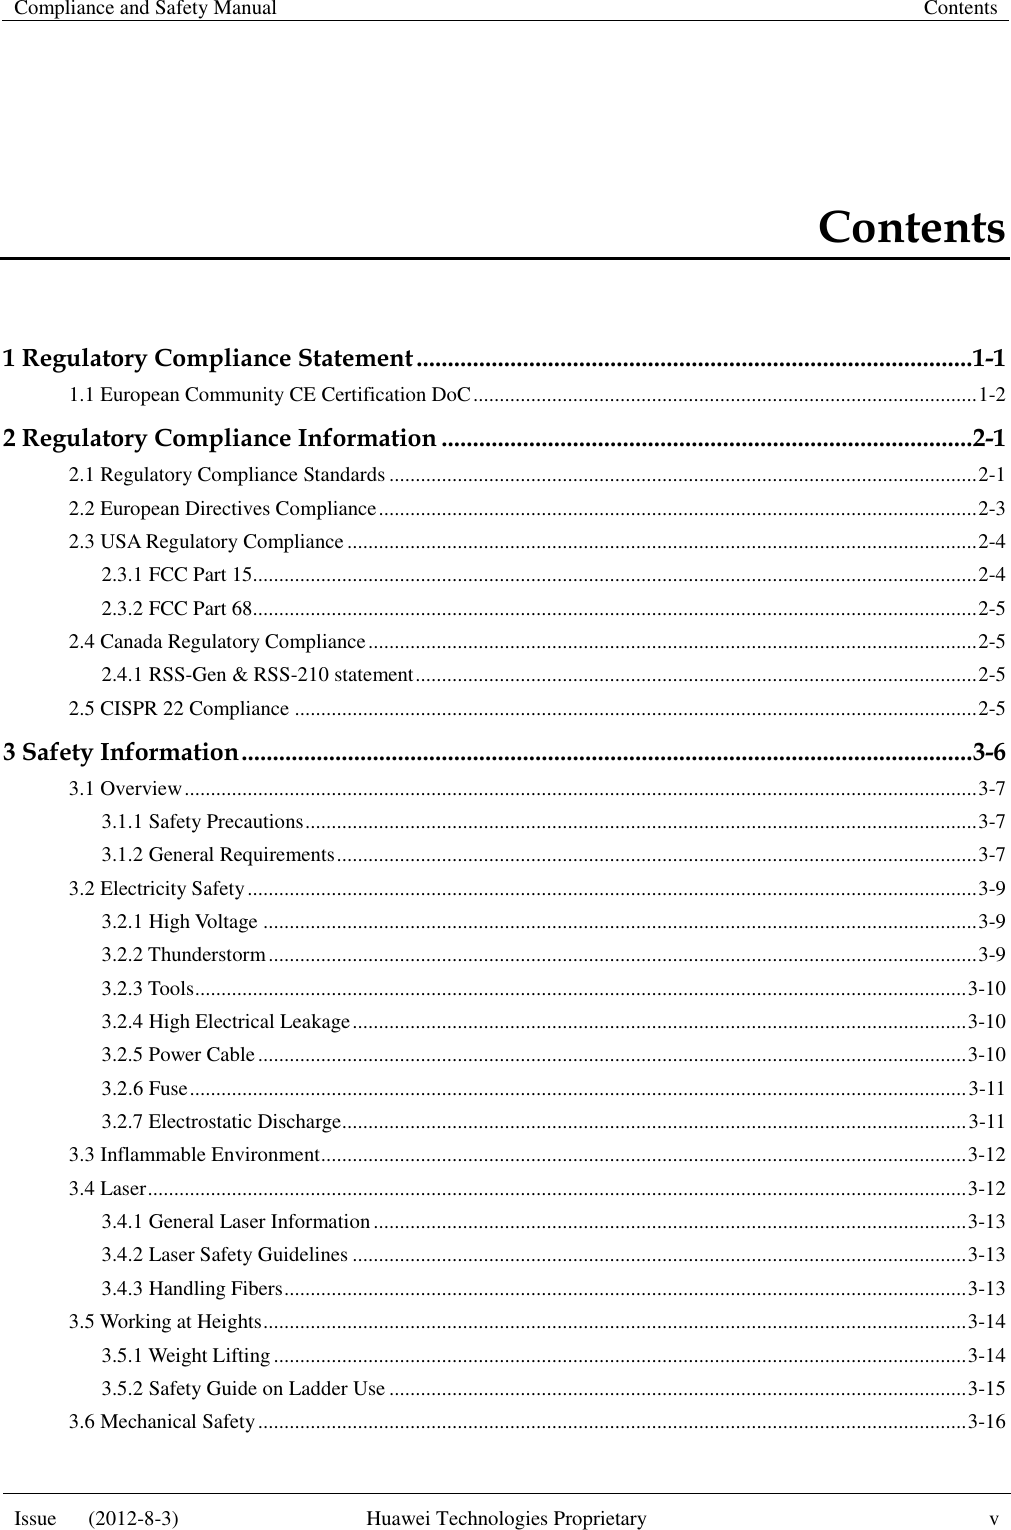 Compliance and Safety Manual Contents  Issue      (2012-8-3) Huawei Technologies Proprietary v  Contents 1 Regulatory Compliance Statement ......................................................................................... 1-1 1.1 European Community CE Certification DoC ................................................................................................ 1-2 2 Regulatory Compliance Information ..................................................................................... 2-1 2.1 Regulatory Compliance Standards ................................................................................................................ 2-1 2.2 European Directives Compliance .................................................................................................................. 2-3 2.3 USA Regulatory Compliance ........................................................................................................................ 2-4 2.3.1 FCC Part 15.......................................................................................................................................... 2-4 2.3.2 FCC Part 68.......................................................................................................................................... 2-5 2.4 Canada Regulatory Compliance .................................................................................................................... 2-5 2.4.1 RSS-Gen &amp; RSS-210 statement ........................................................................................................... 2-5 2.5 CISPR 22 Compliance .................................................................................................................................. 2-5 3 Safety Information ..................................................................................................................... 3-6 3.1 Overview ....................................................................................................................................................... 3-7 3.1.1 Safety Precautions ................................................................................................................................ 3-7 3.1.2 General Requirements .......................................................................................................................... 3-7 3.2 Electricity Safety ........................................................................................................................................... 3-9 3.2.1 High Voltage ........................................................................................................................................ 3-9 3.2.2 Thunderstorm ....................................................................................................................................... 3-9 3.2.3 Tools ................................................................................................................................................... 3-10 3.2.4 High Electrical Leakage ..................................................................................................................... 3-10 3.2.5 Power Cable ....................................................................................................................................... 3-10 3.2.6 Fuse .................................................................................................................................................... 3-11 3.2.7 Electrostatic Discharge....................................................................................................................... 3-11 3.3 Inflammable Environment ........................................................................................................................... 3-12 3.4 Laser ............................................................................................................................................................ 3-12 3.4.1 General Laser Information ................................................................................................................. 3-13 3.4.2 Laser Safety Guidelines ..................................................................................................................... 3-13 3.4.3 Handling Fibers .................................................................................................................................. 3-13 3.5 Working at Heights ...................................................................................................................................... 3-14 3.5.1 Weight Lifting .................................................................................................................................... 3-14 3.5.2 Safety Guide on Ladder Use .............................................................................................................. 3-15 3.6 Mechanical Safety ....................................................................................................................................... 3-16 